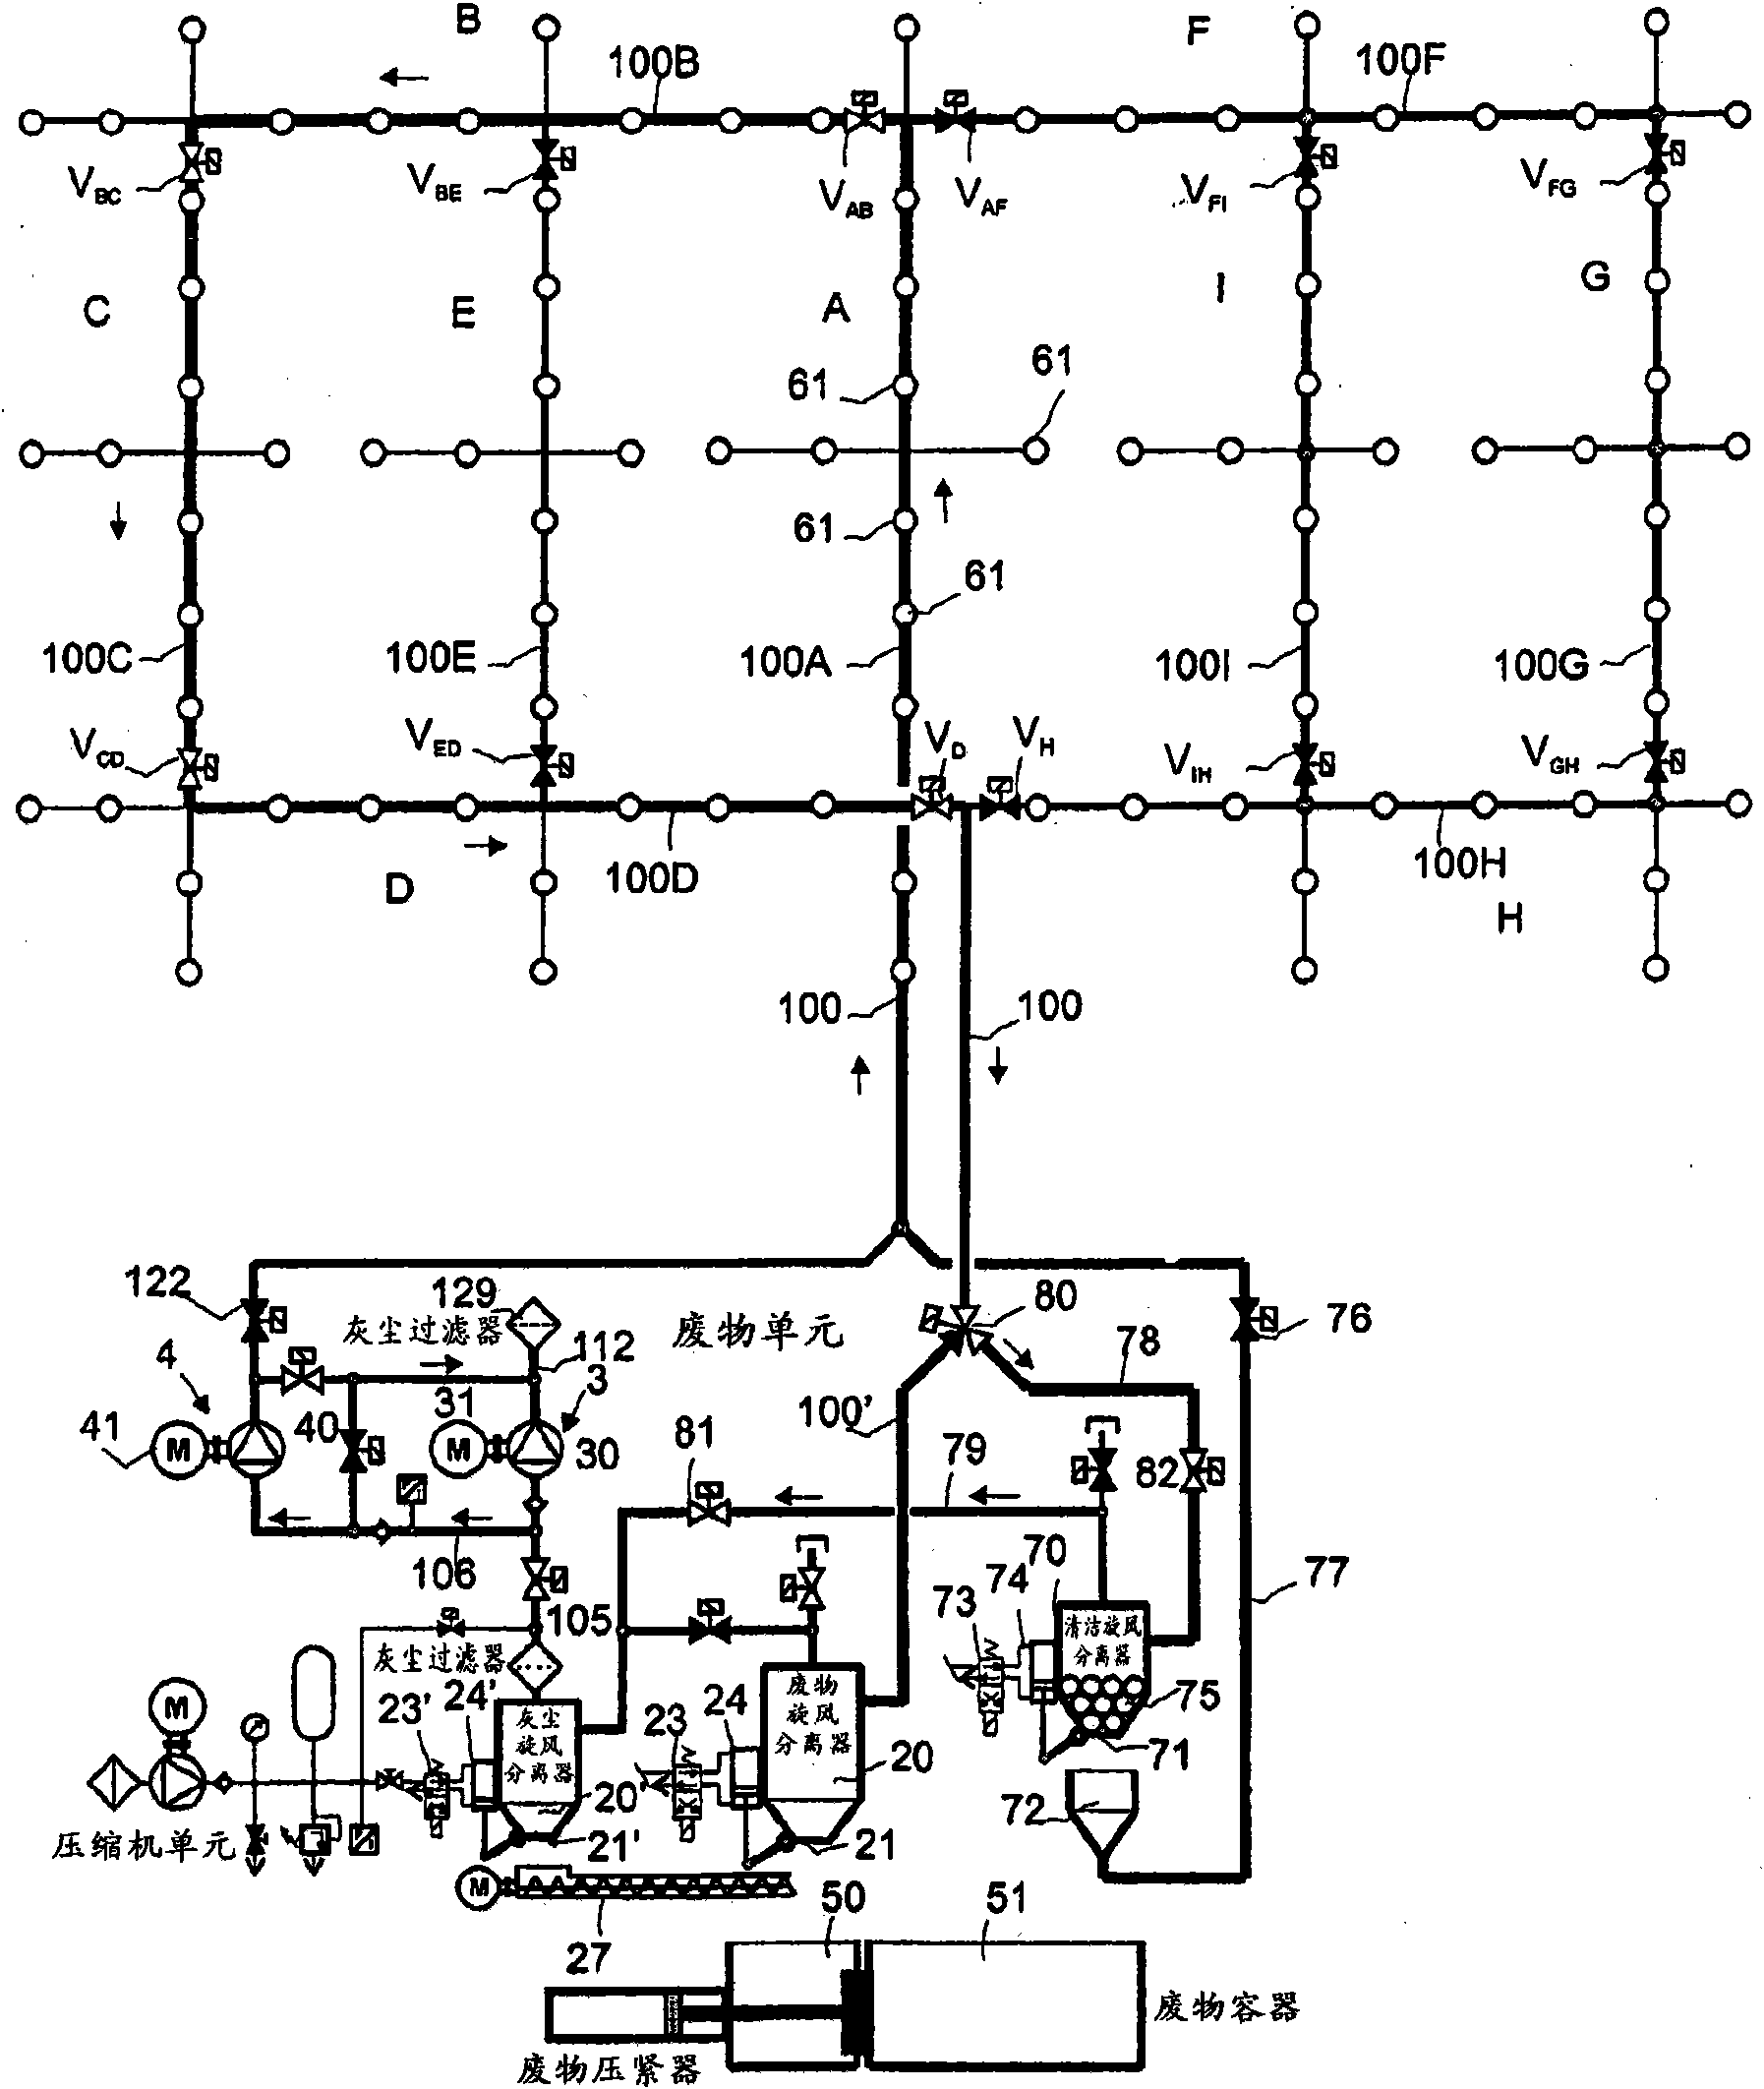 Method and apparatus in pneumatic material conveying system